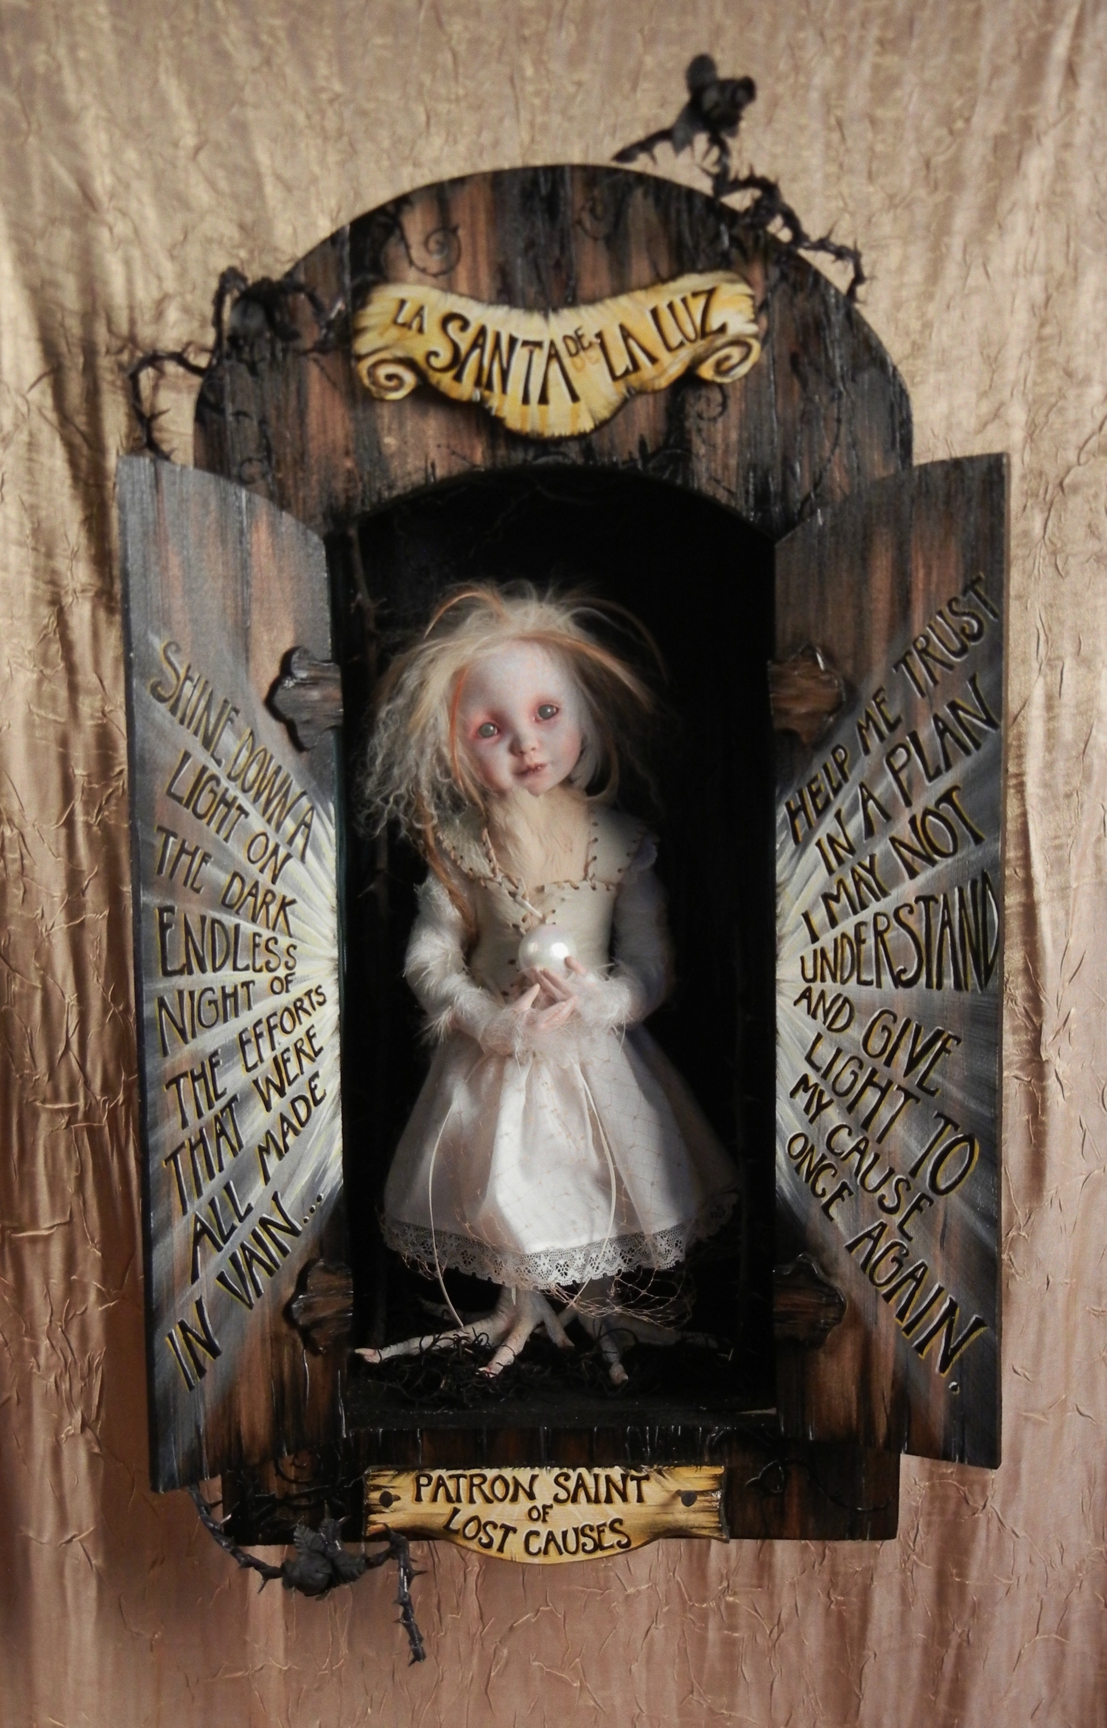 open mixed media cabinet reveals taxidermy artdoll assemblage blonde wild doll in white dress with bird feet